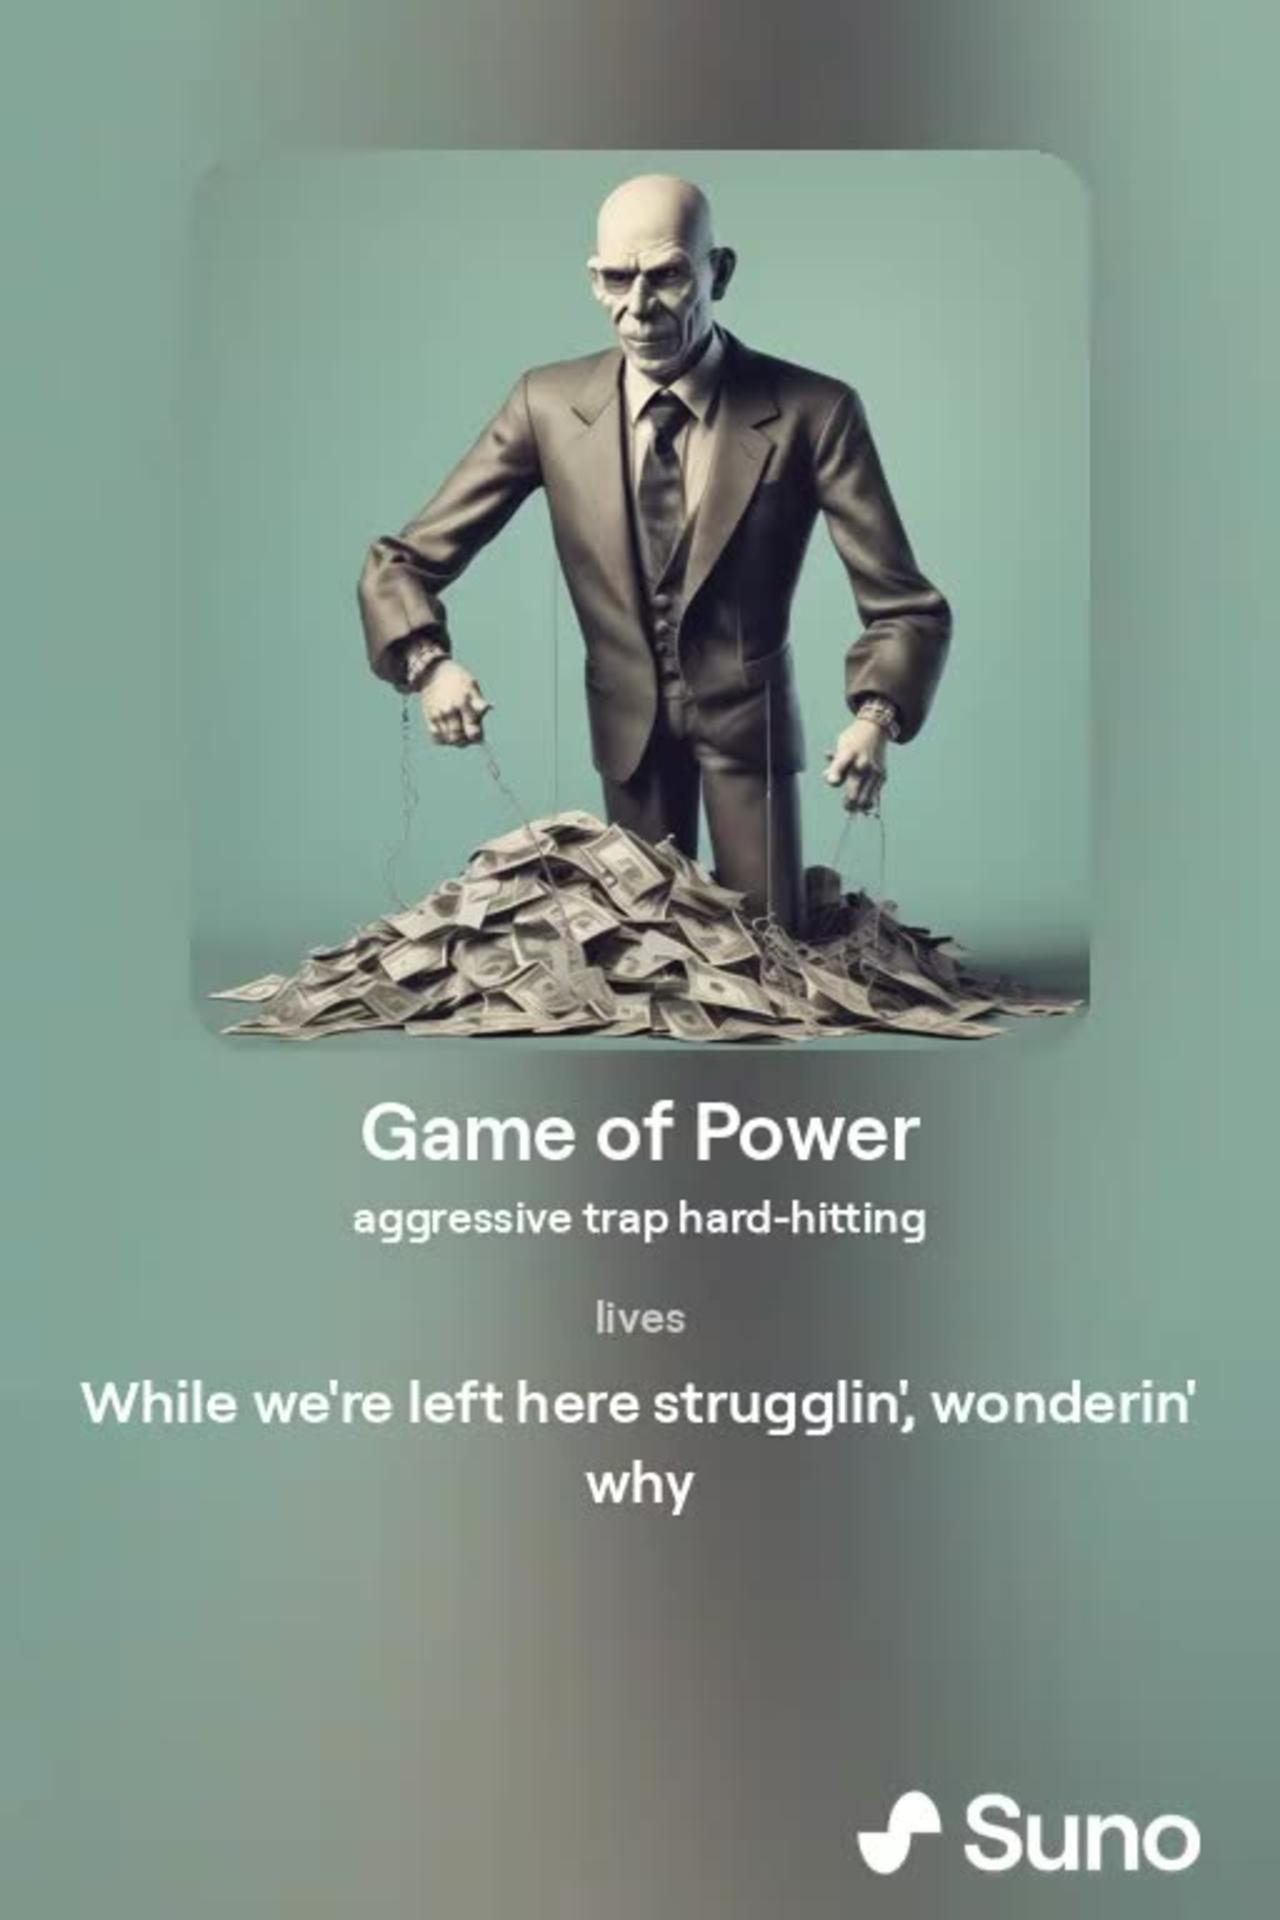 Game of power